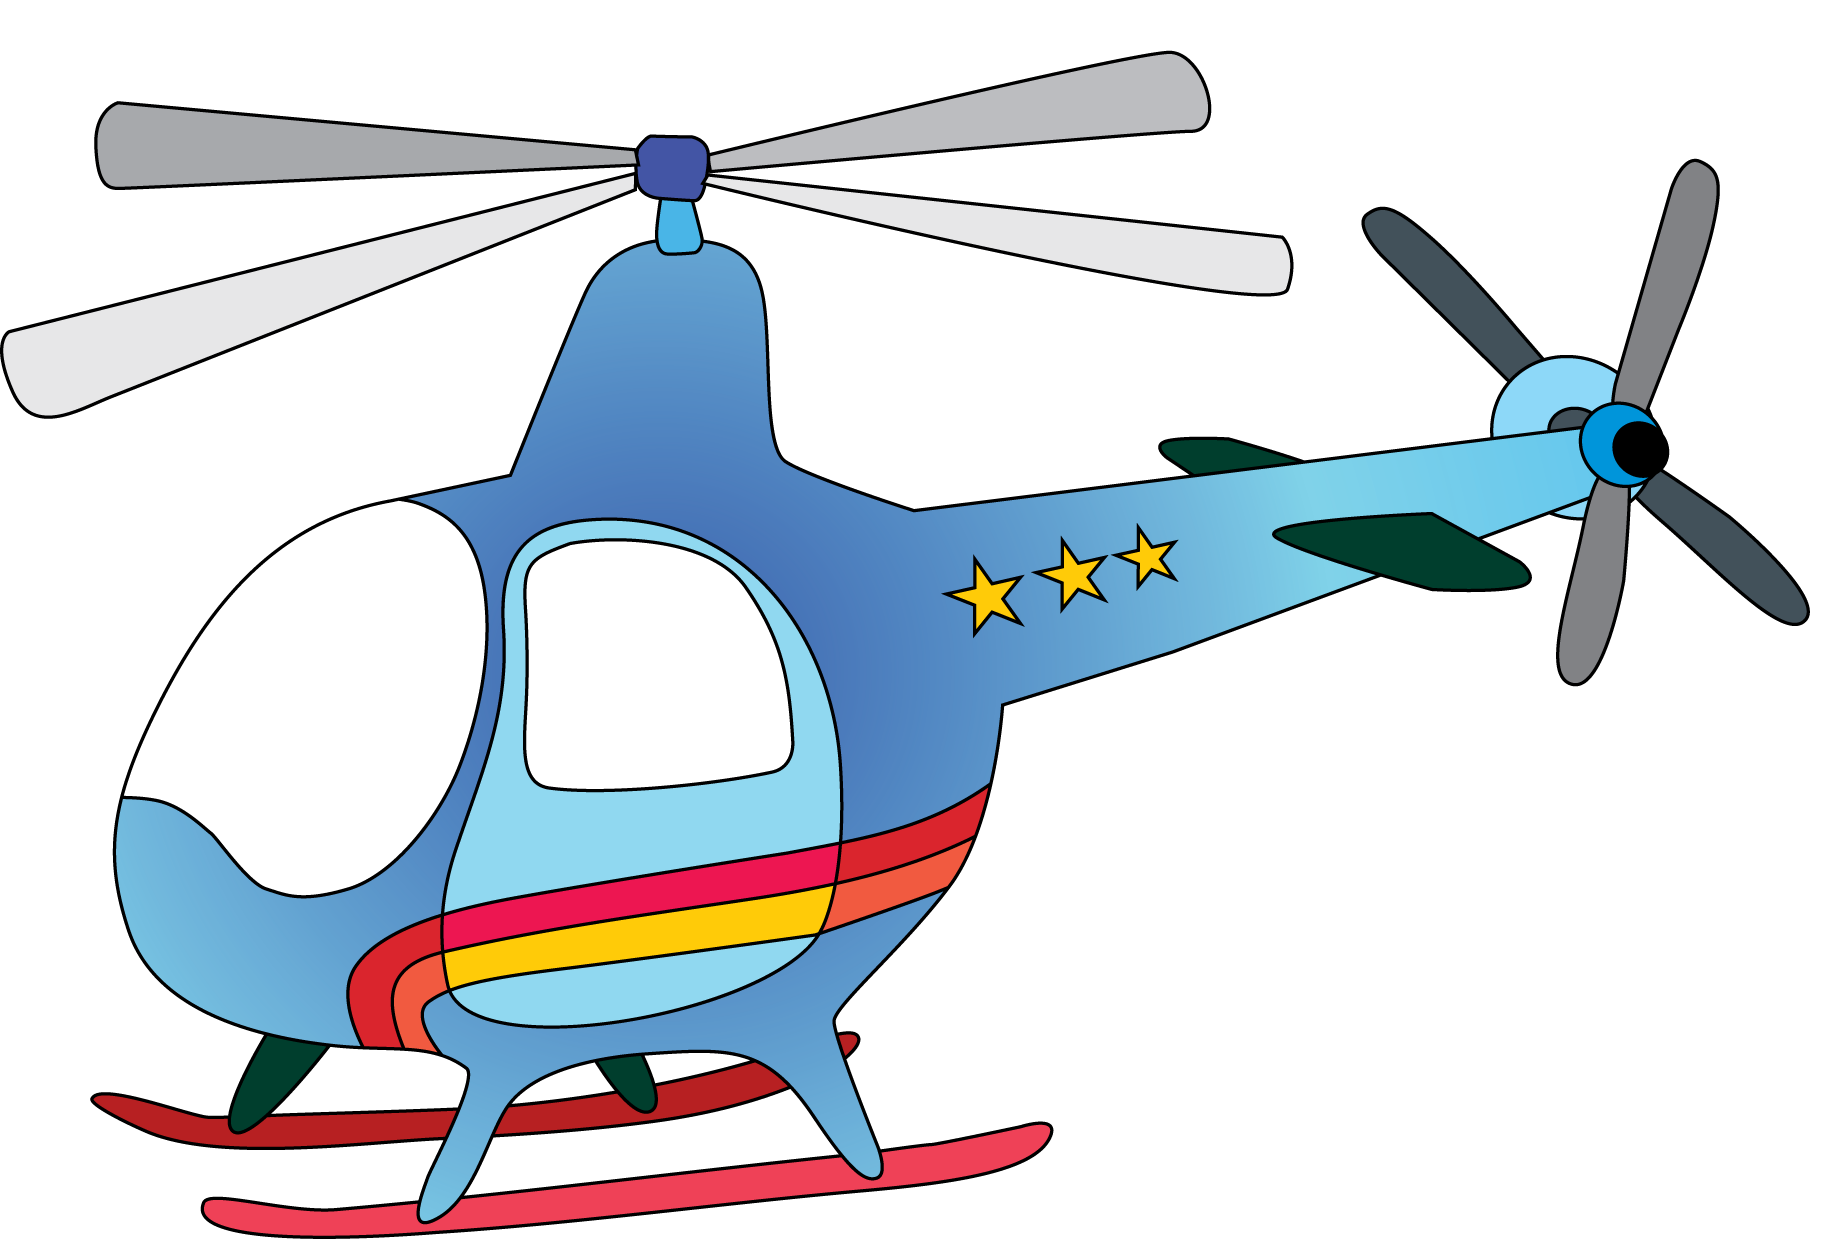 Helicopter Clip Art Free | Clipart Panda - Free Clipart Images